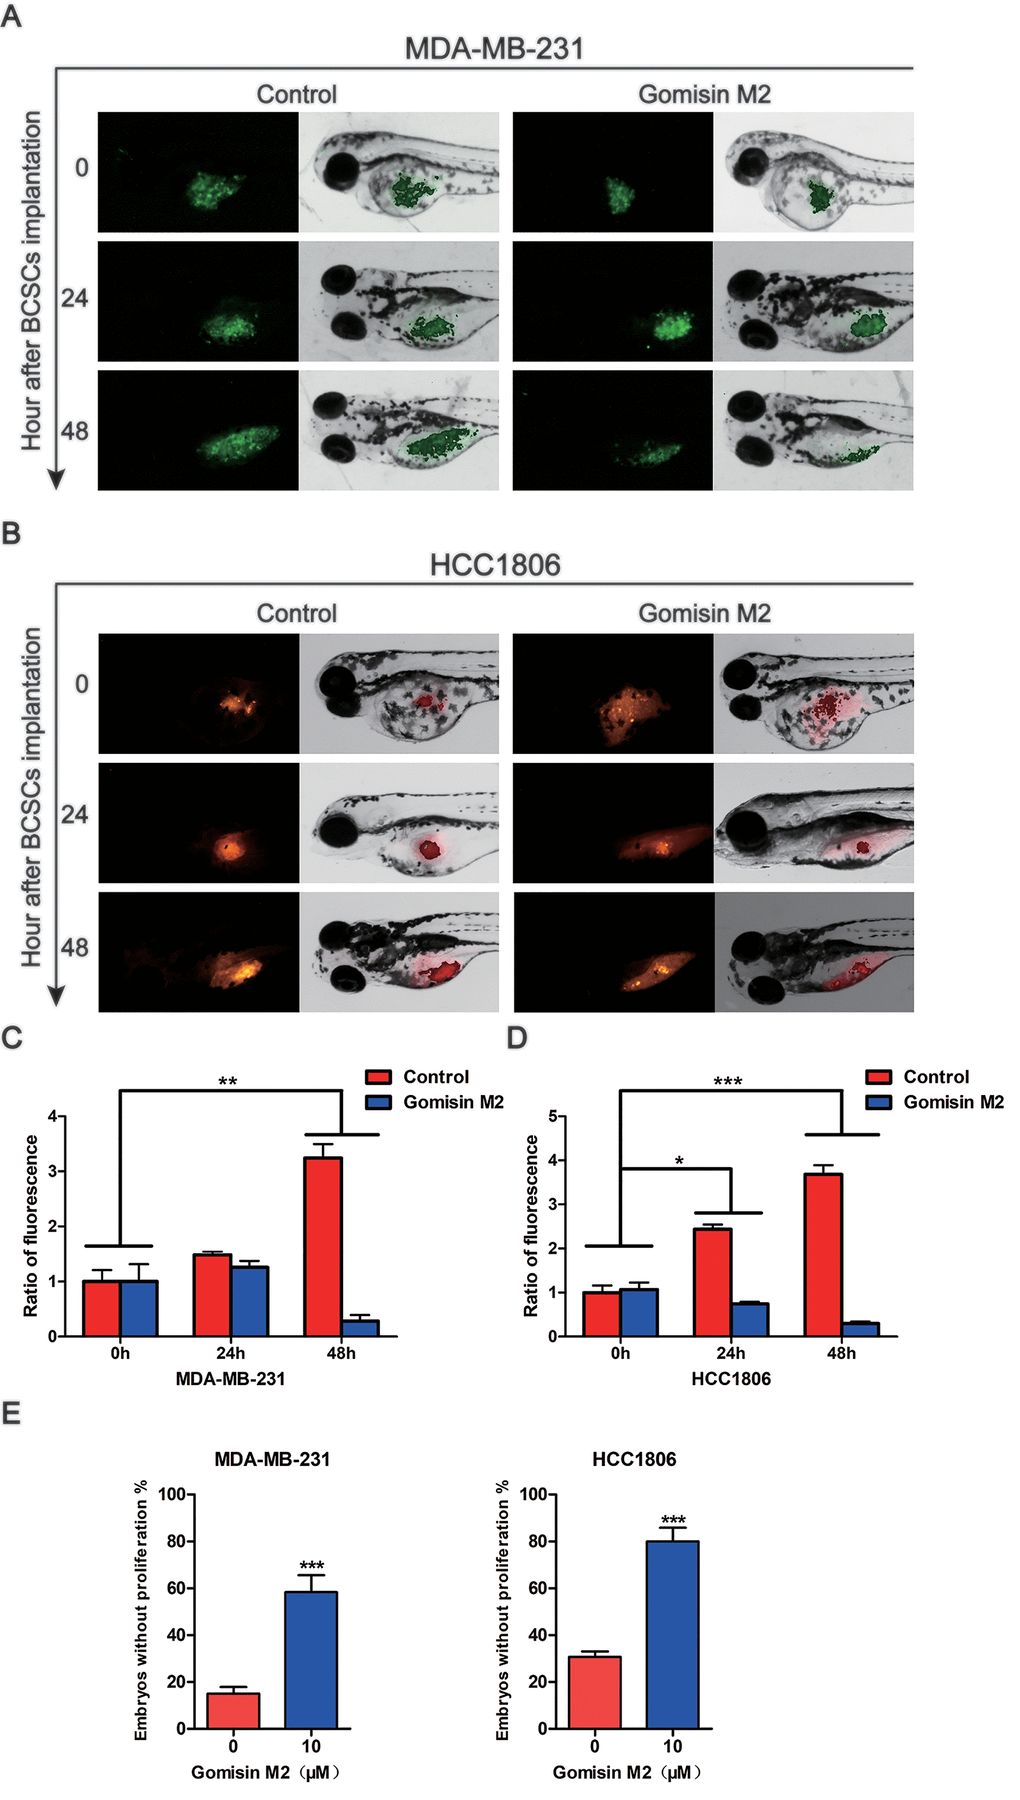 Gomisin M2 inhibits tumor growth in zebrafish. Cancer stem cells enriched MDA-MB-231-GFP (green) (A) or HCC1806 (red) (B) cells were microinjected into zebrafish embryos (larvae stage, n = 30 per group). Fluorescence density was captured by fluorescence microscopy at 0, 24 and 48 h after implantation. (C) The quantitative data of panel A in green fluorescence intensity. (D) The quantitative data of panel B in red fluorescence intensity. *p E) Statistical analysis of panel A and B the percentages of embryos without proliferation in control and Gomisin M2 groups in 48 h.